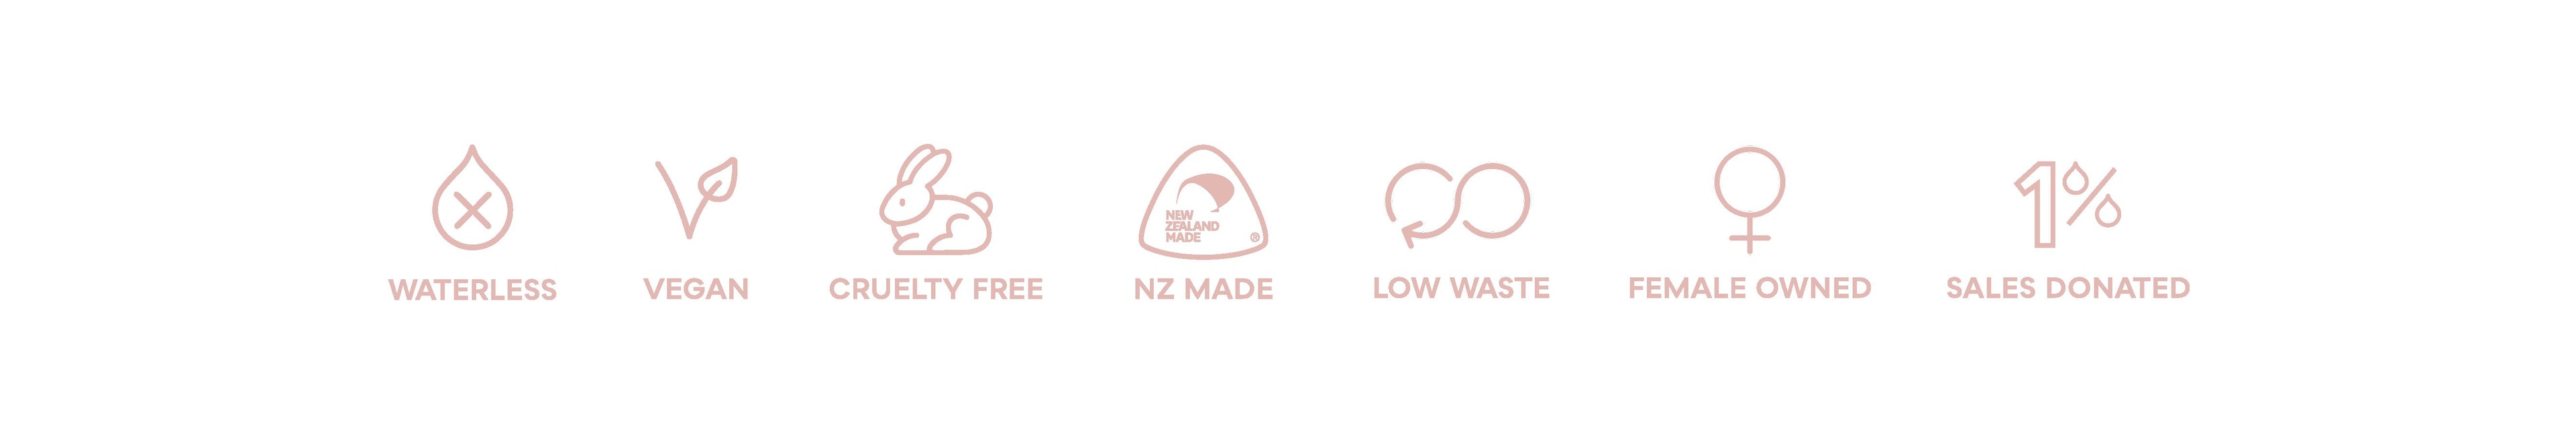 Waterless, Vegan, Cruelty Free, Naturally derived, NZ Made, Low waste, Female owned & 1% of sales donated. Beauty that cares